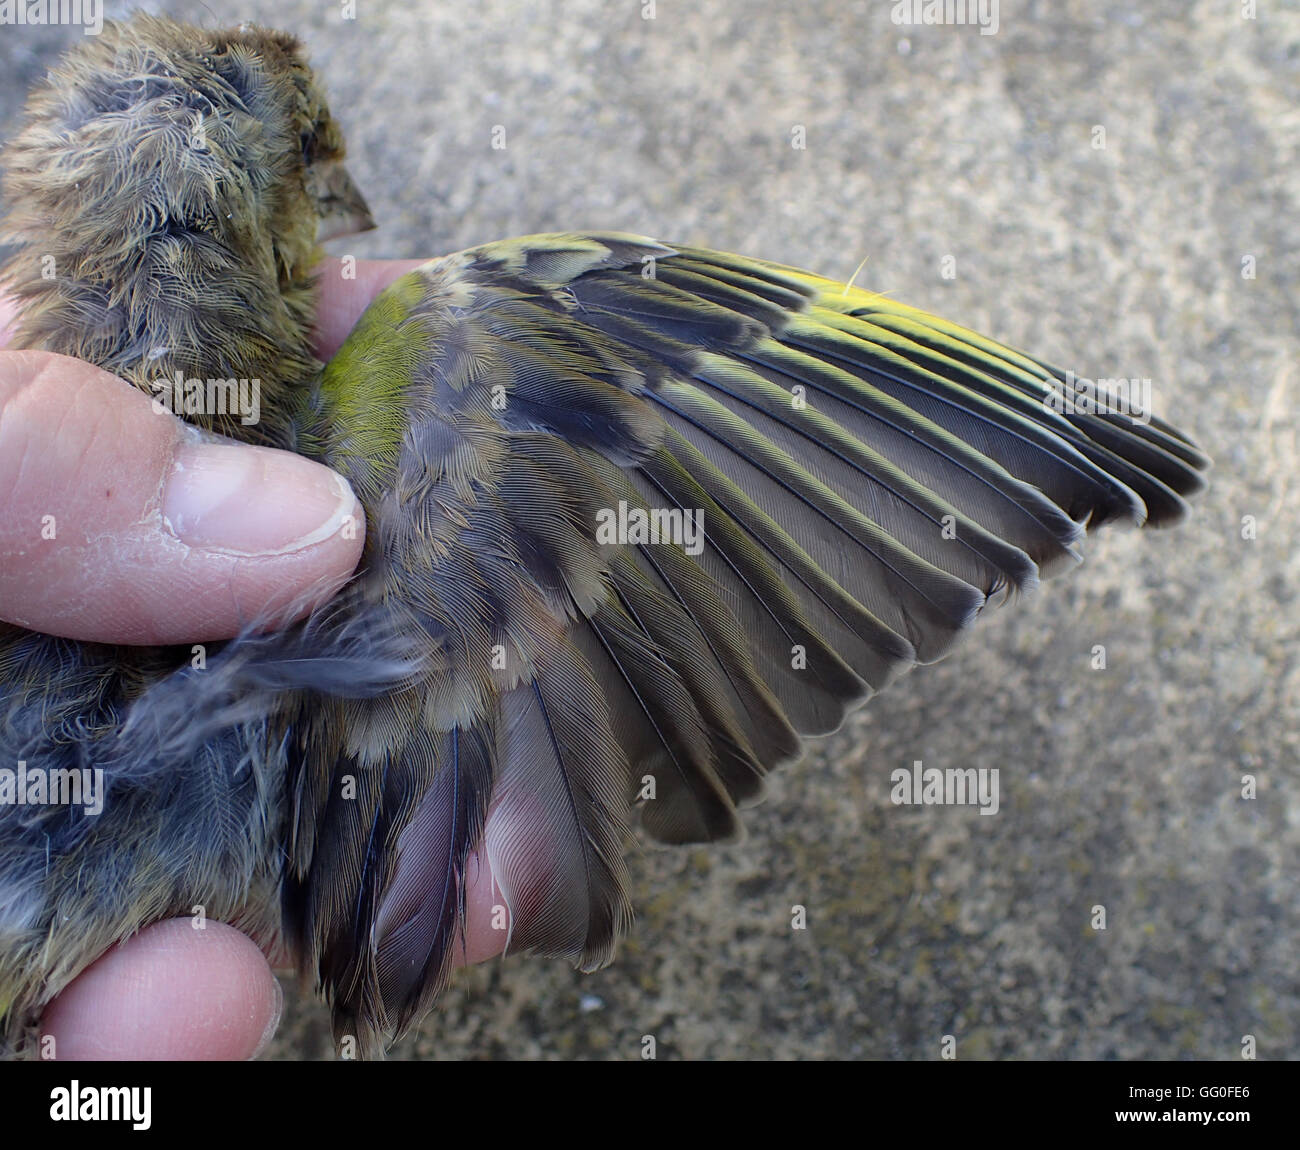 Dead juvenile greenfinch (Carduelis chloris) with right wing extended, held by the photographer Stock Photo